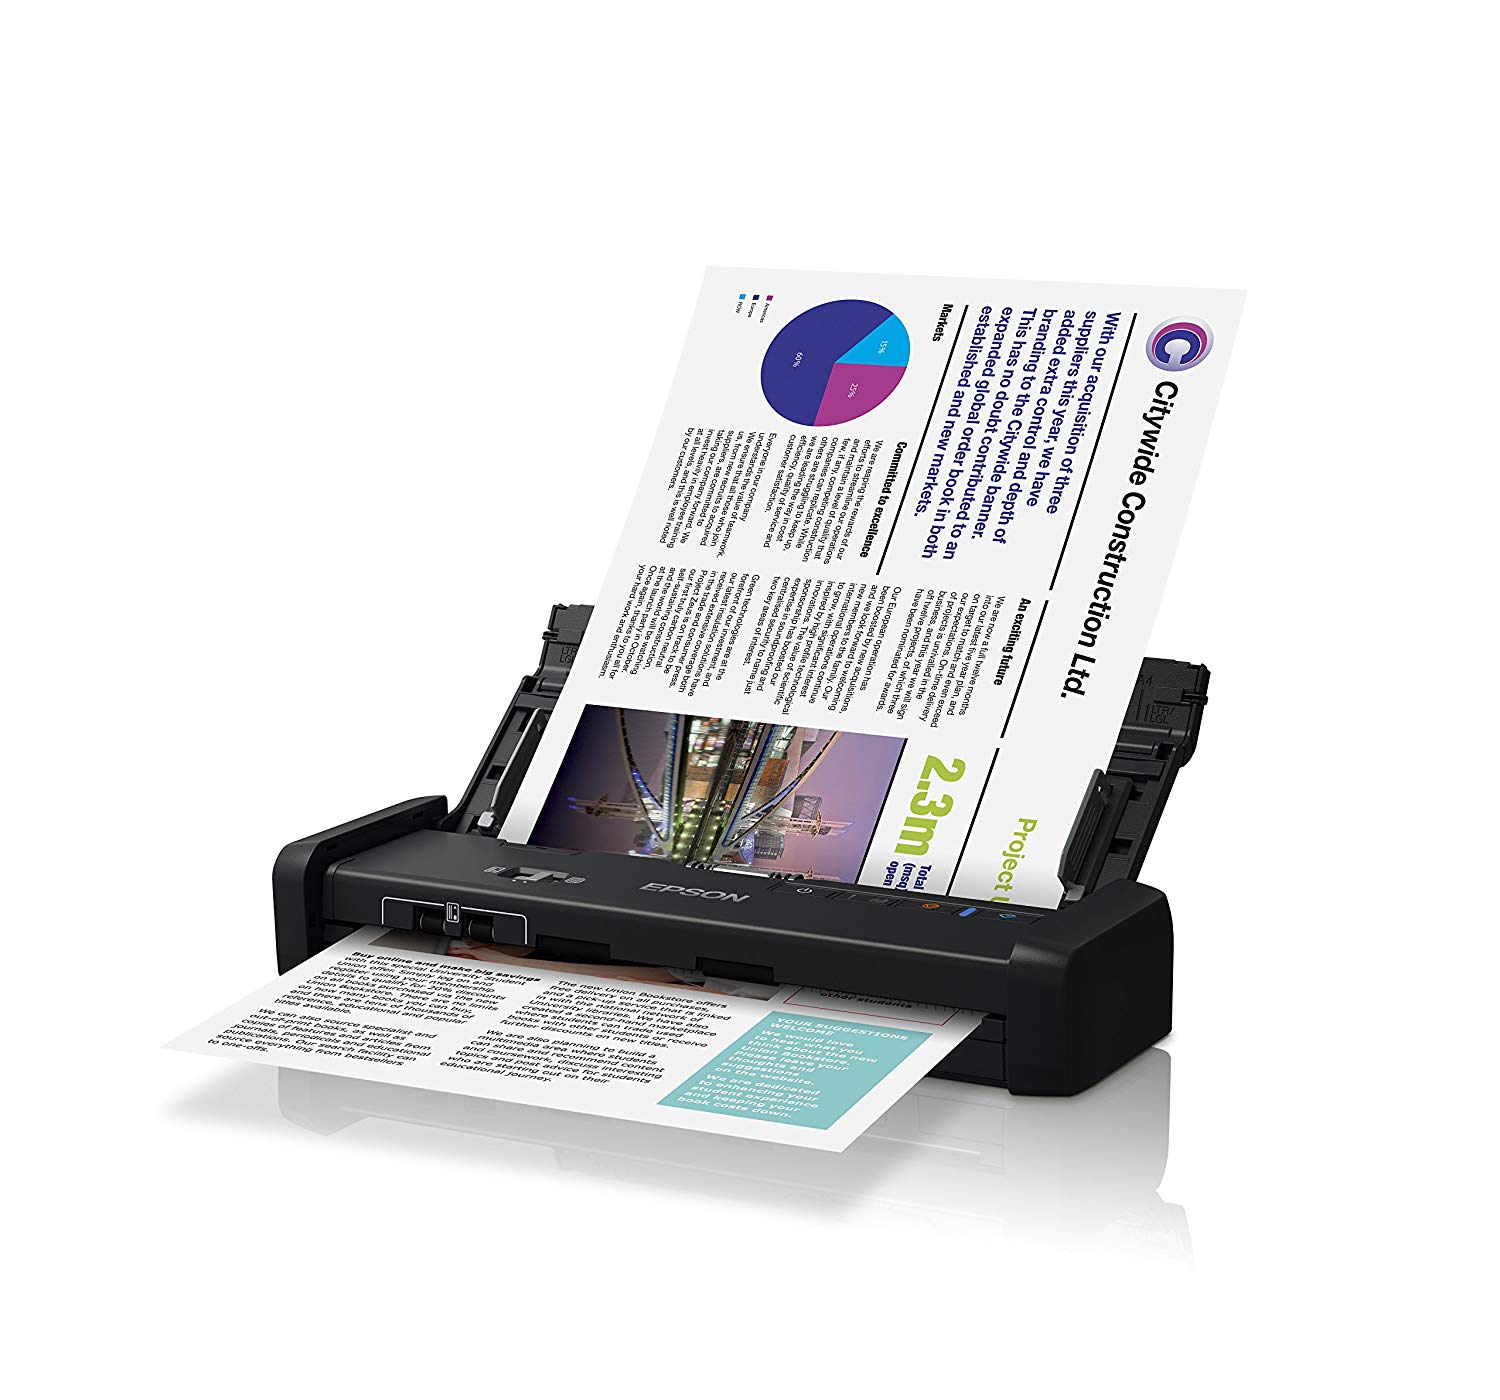 Epson DS-320 Mobile Scanner with ADF:  25ppm, TWAIN & ISIS Drivers, 3-Year Warranty